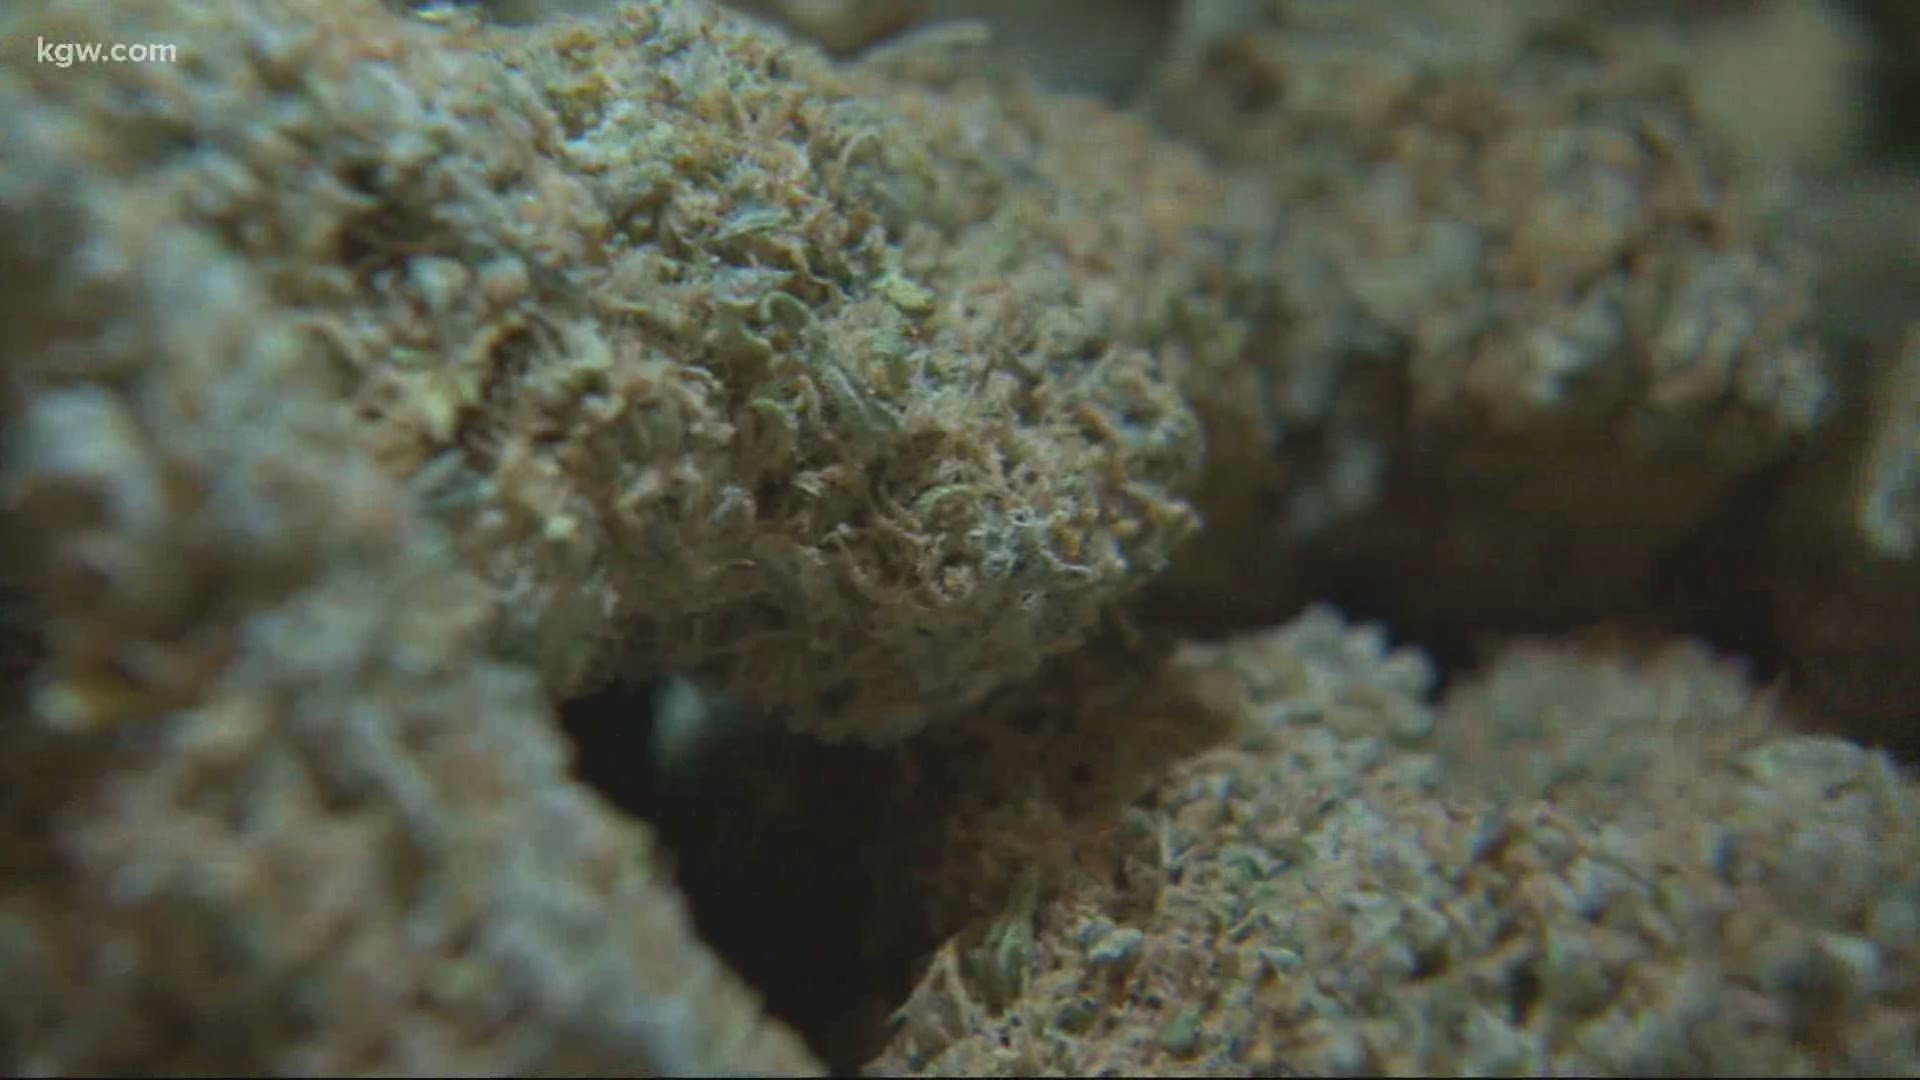 A look at the impact of the coronavirus on legal pot.